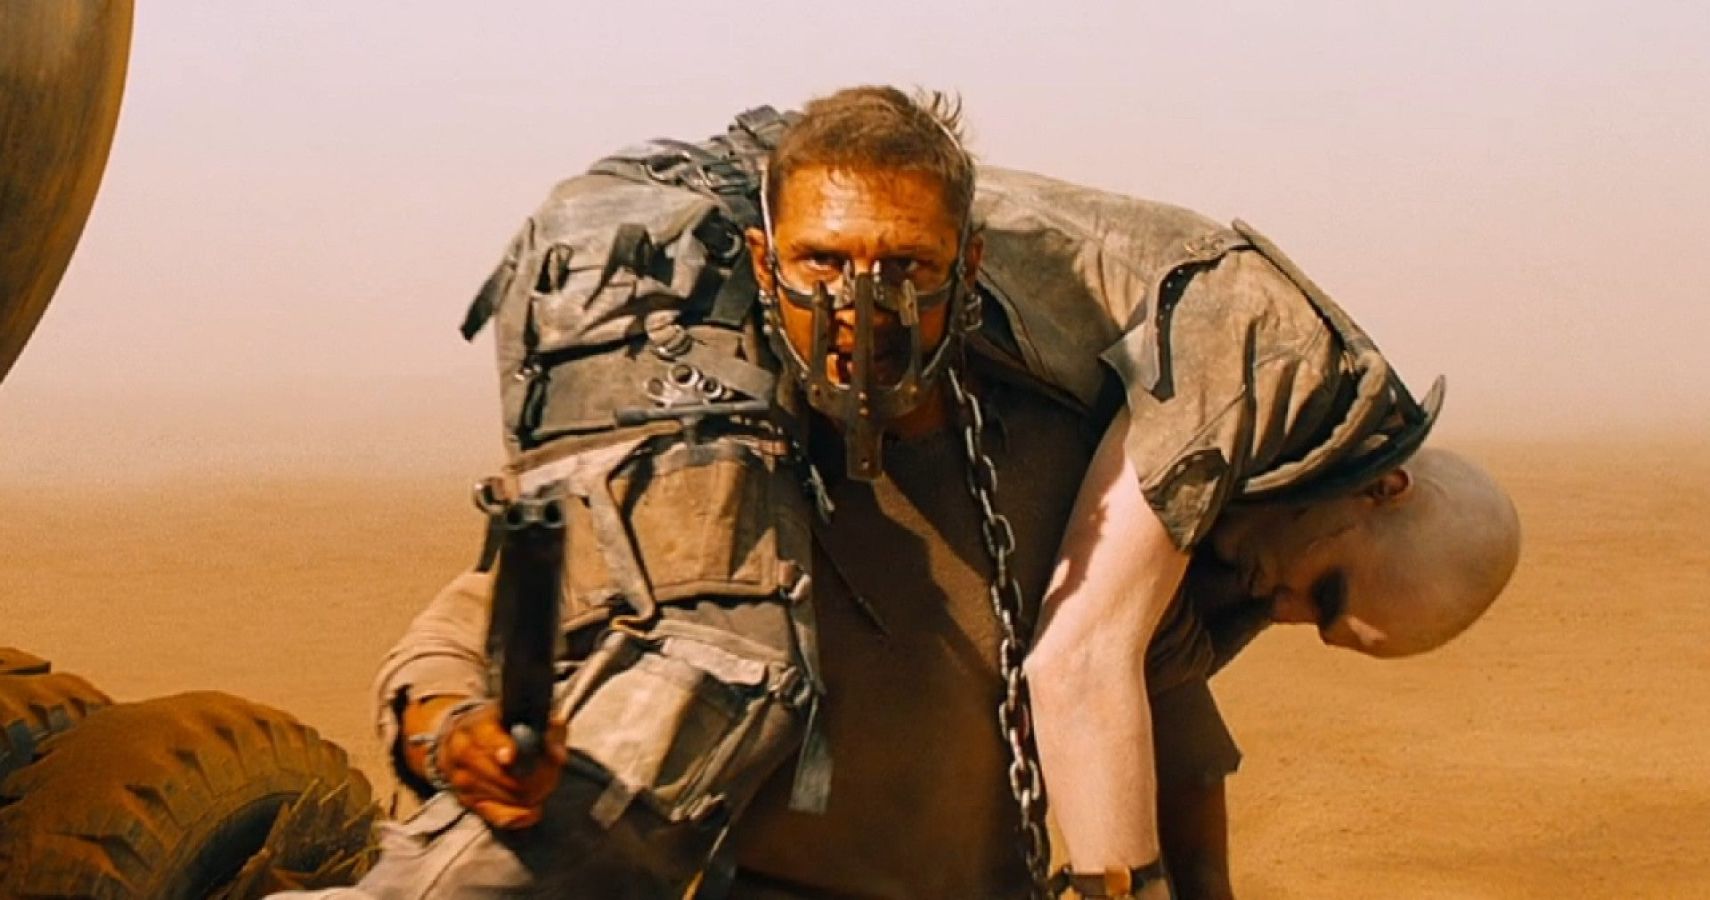 mad max actor